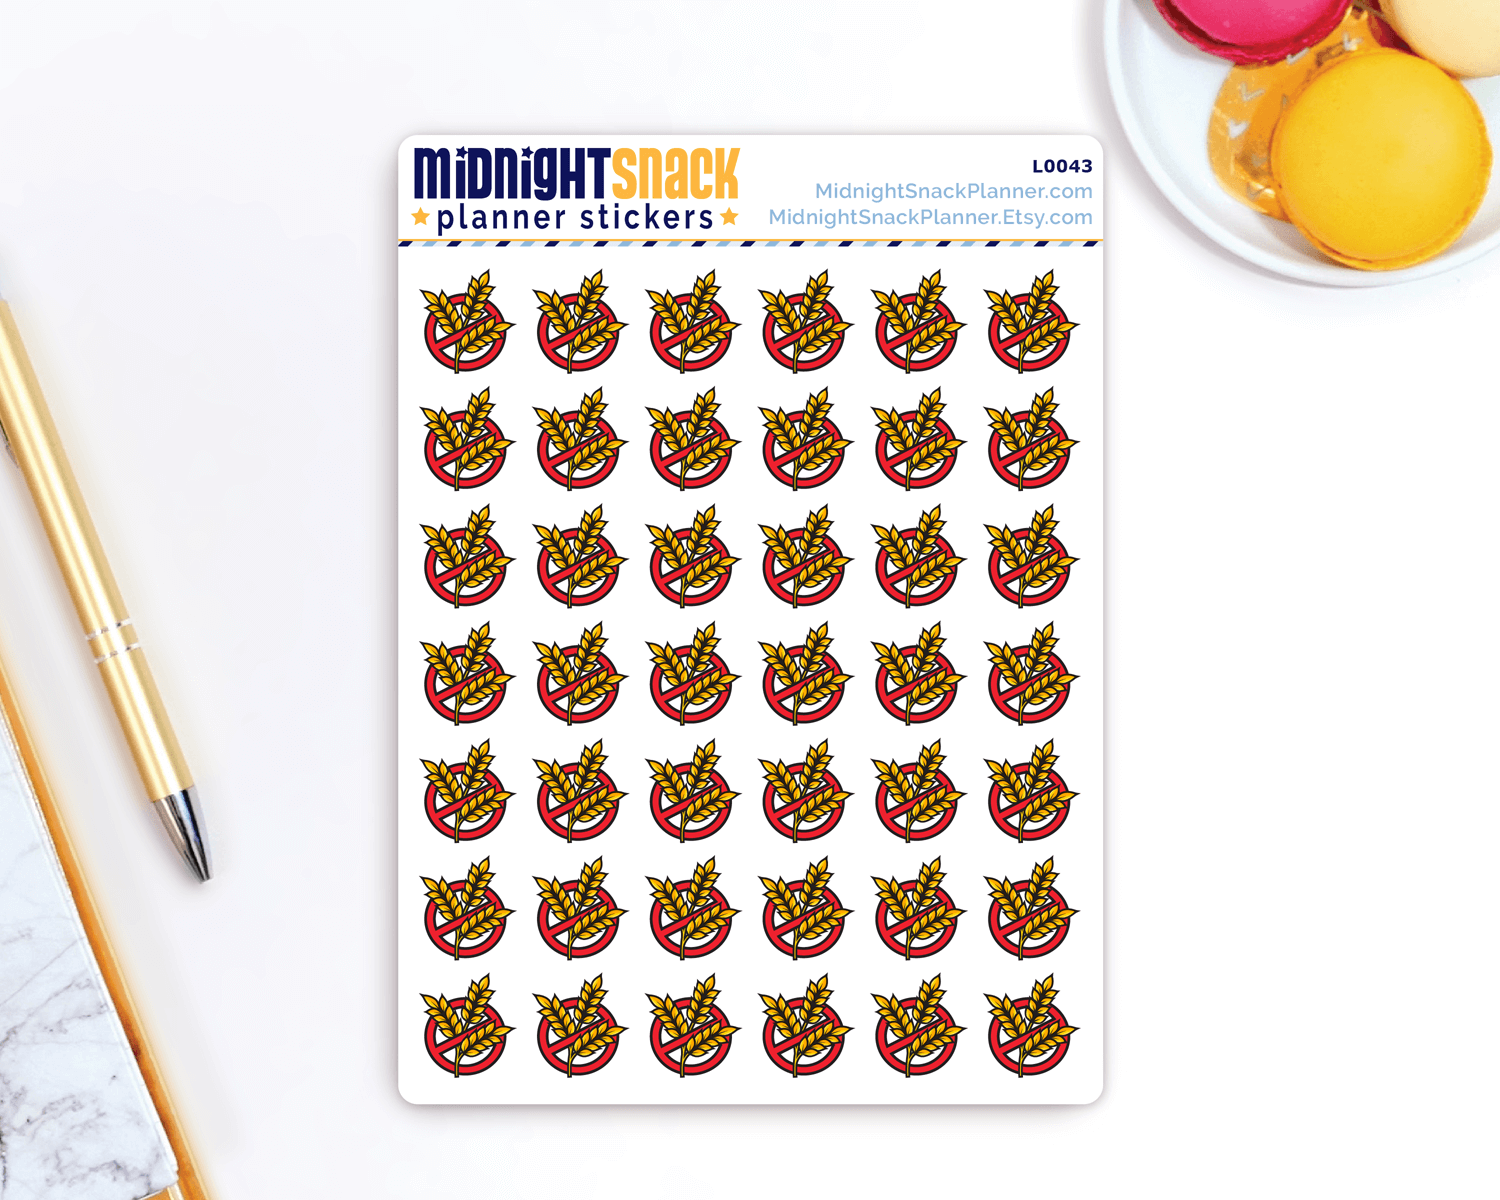 No Wheat Icon Stickers: Dietary Restrictions Planner Stickers